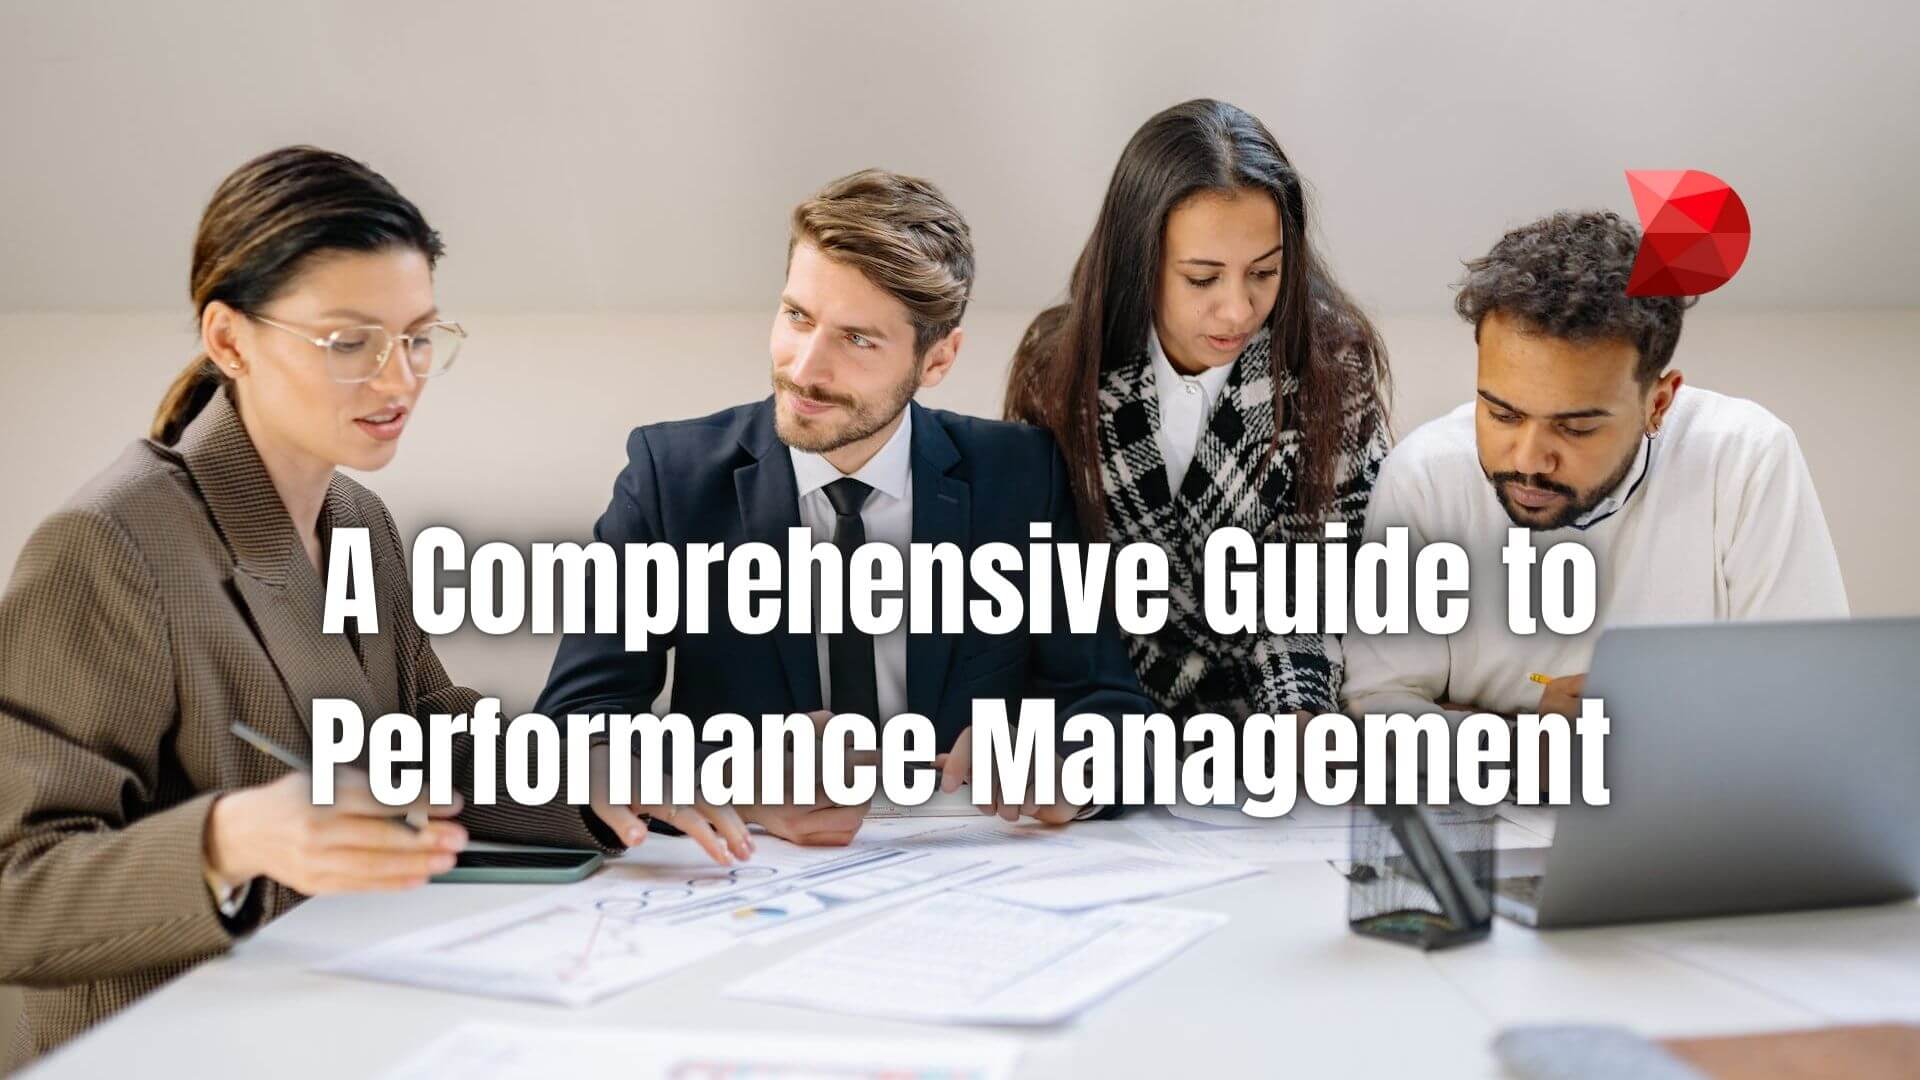 Master performance management strategies with this comprehensive guide. Elevate productivity and success in your organization today!